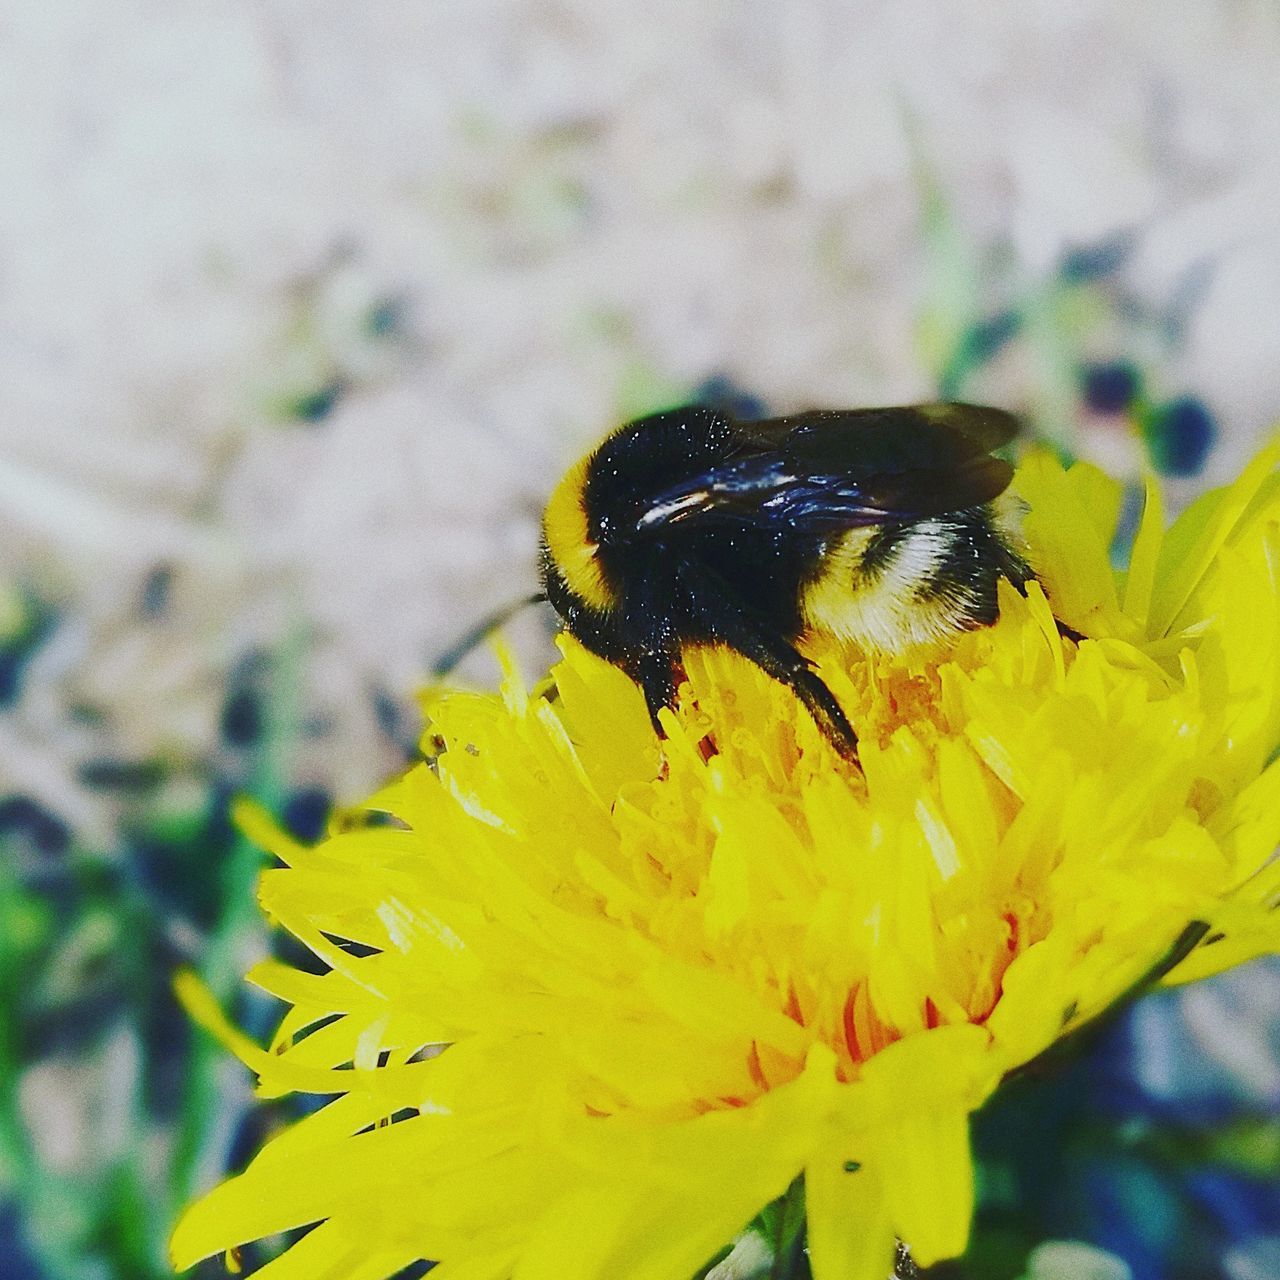 flower, insect, fragility, animal themes, yellow, one animal, petal, animals in the wild, nature, freshness, beauty in nature, growth, close-up, bee, flower head, plant, outdoors, no people, day, pollination, animal wildlife, focus on foreground, bumblebee